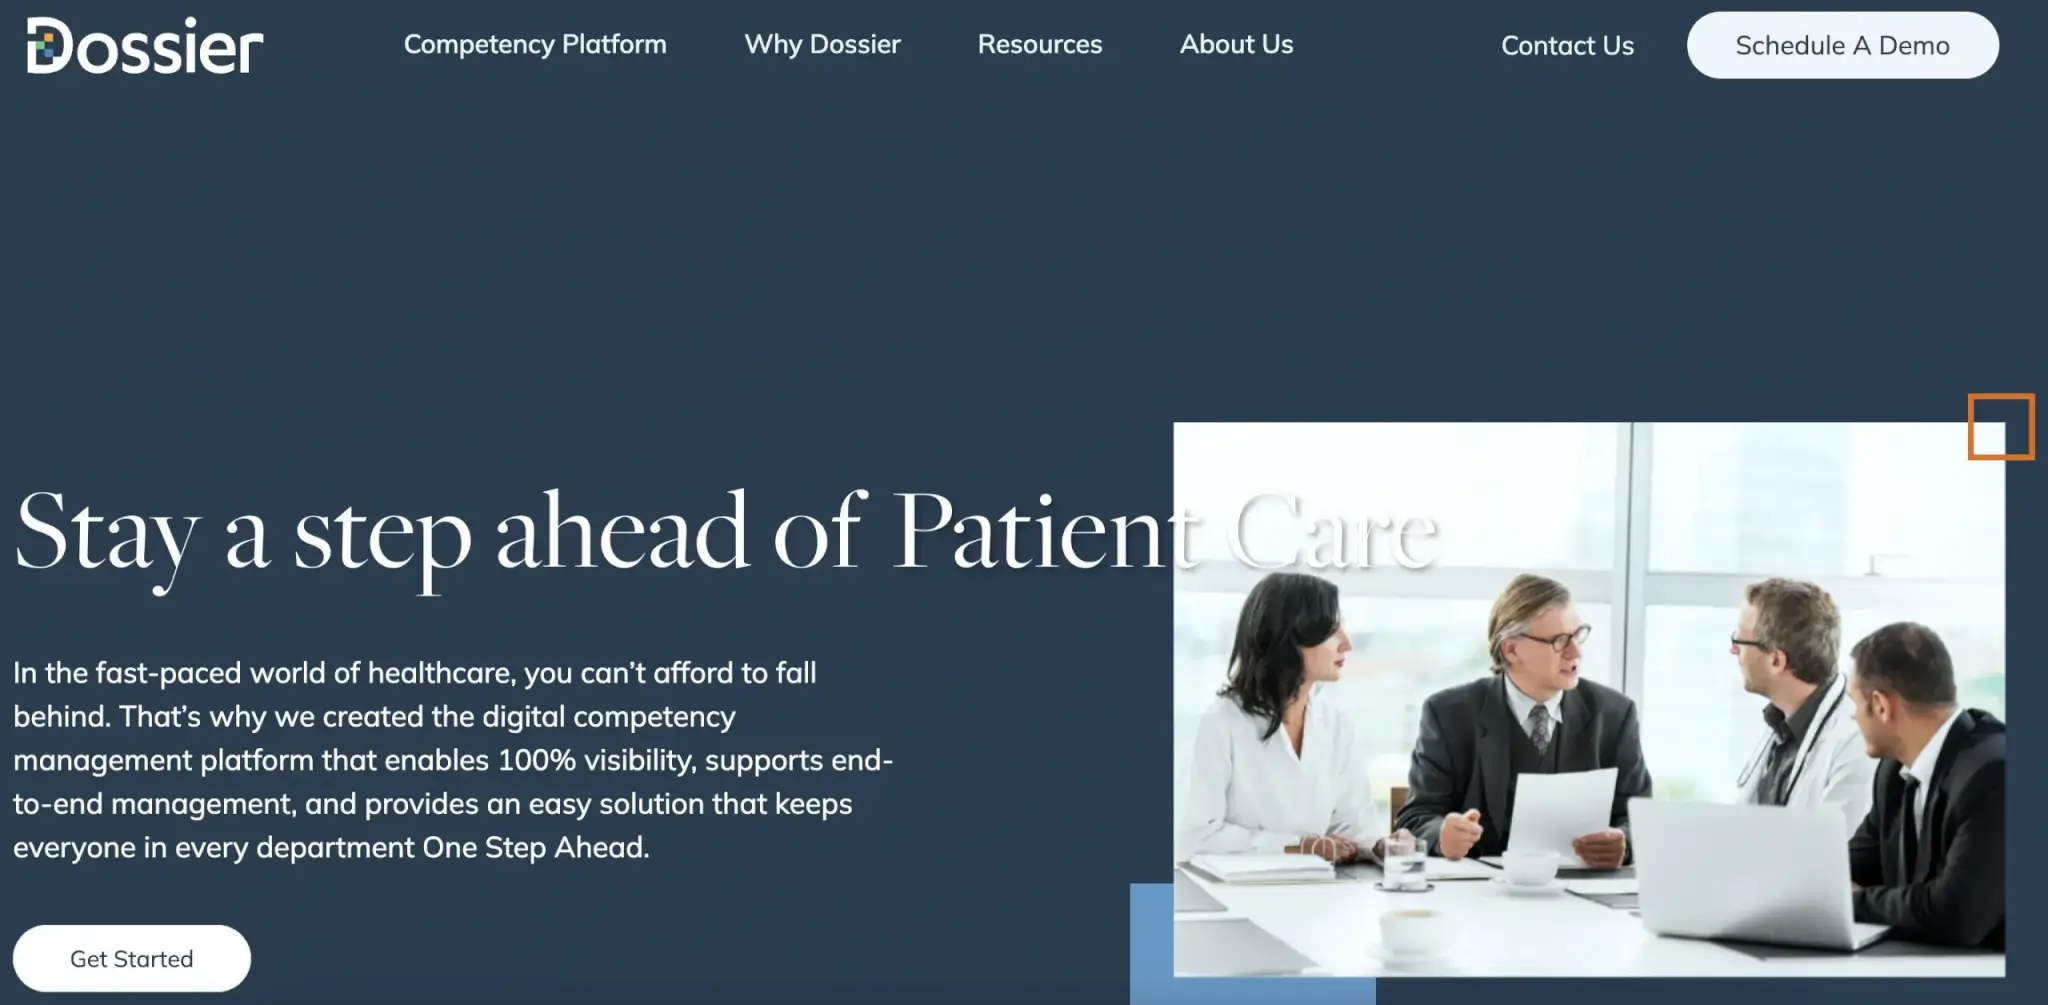 an image of Dossier's landing page showing a group of medical professionals discussing, seated and with laptops